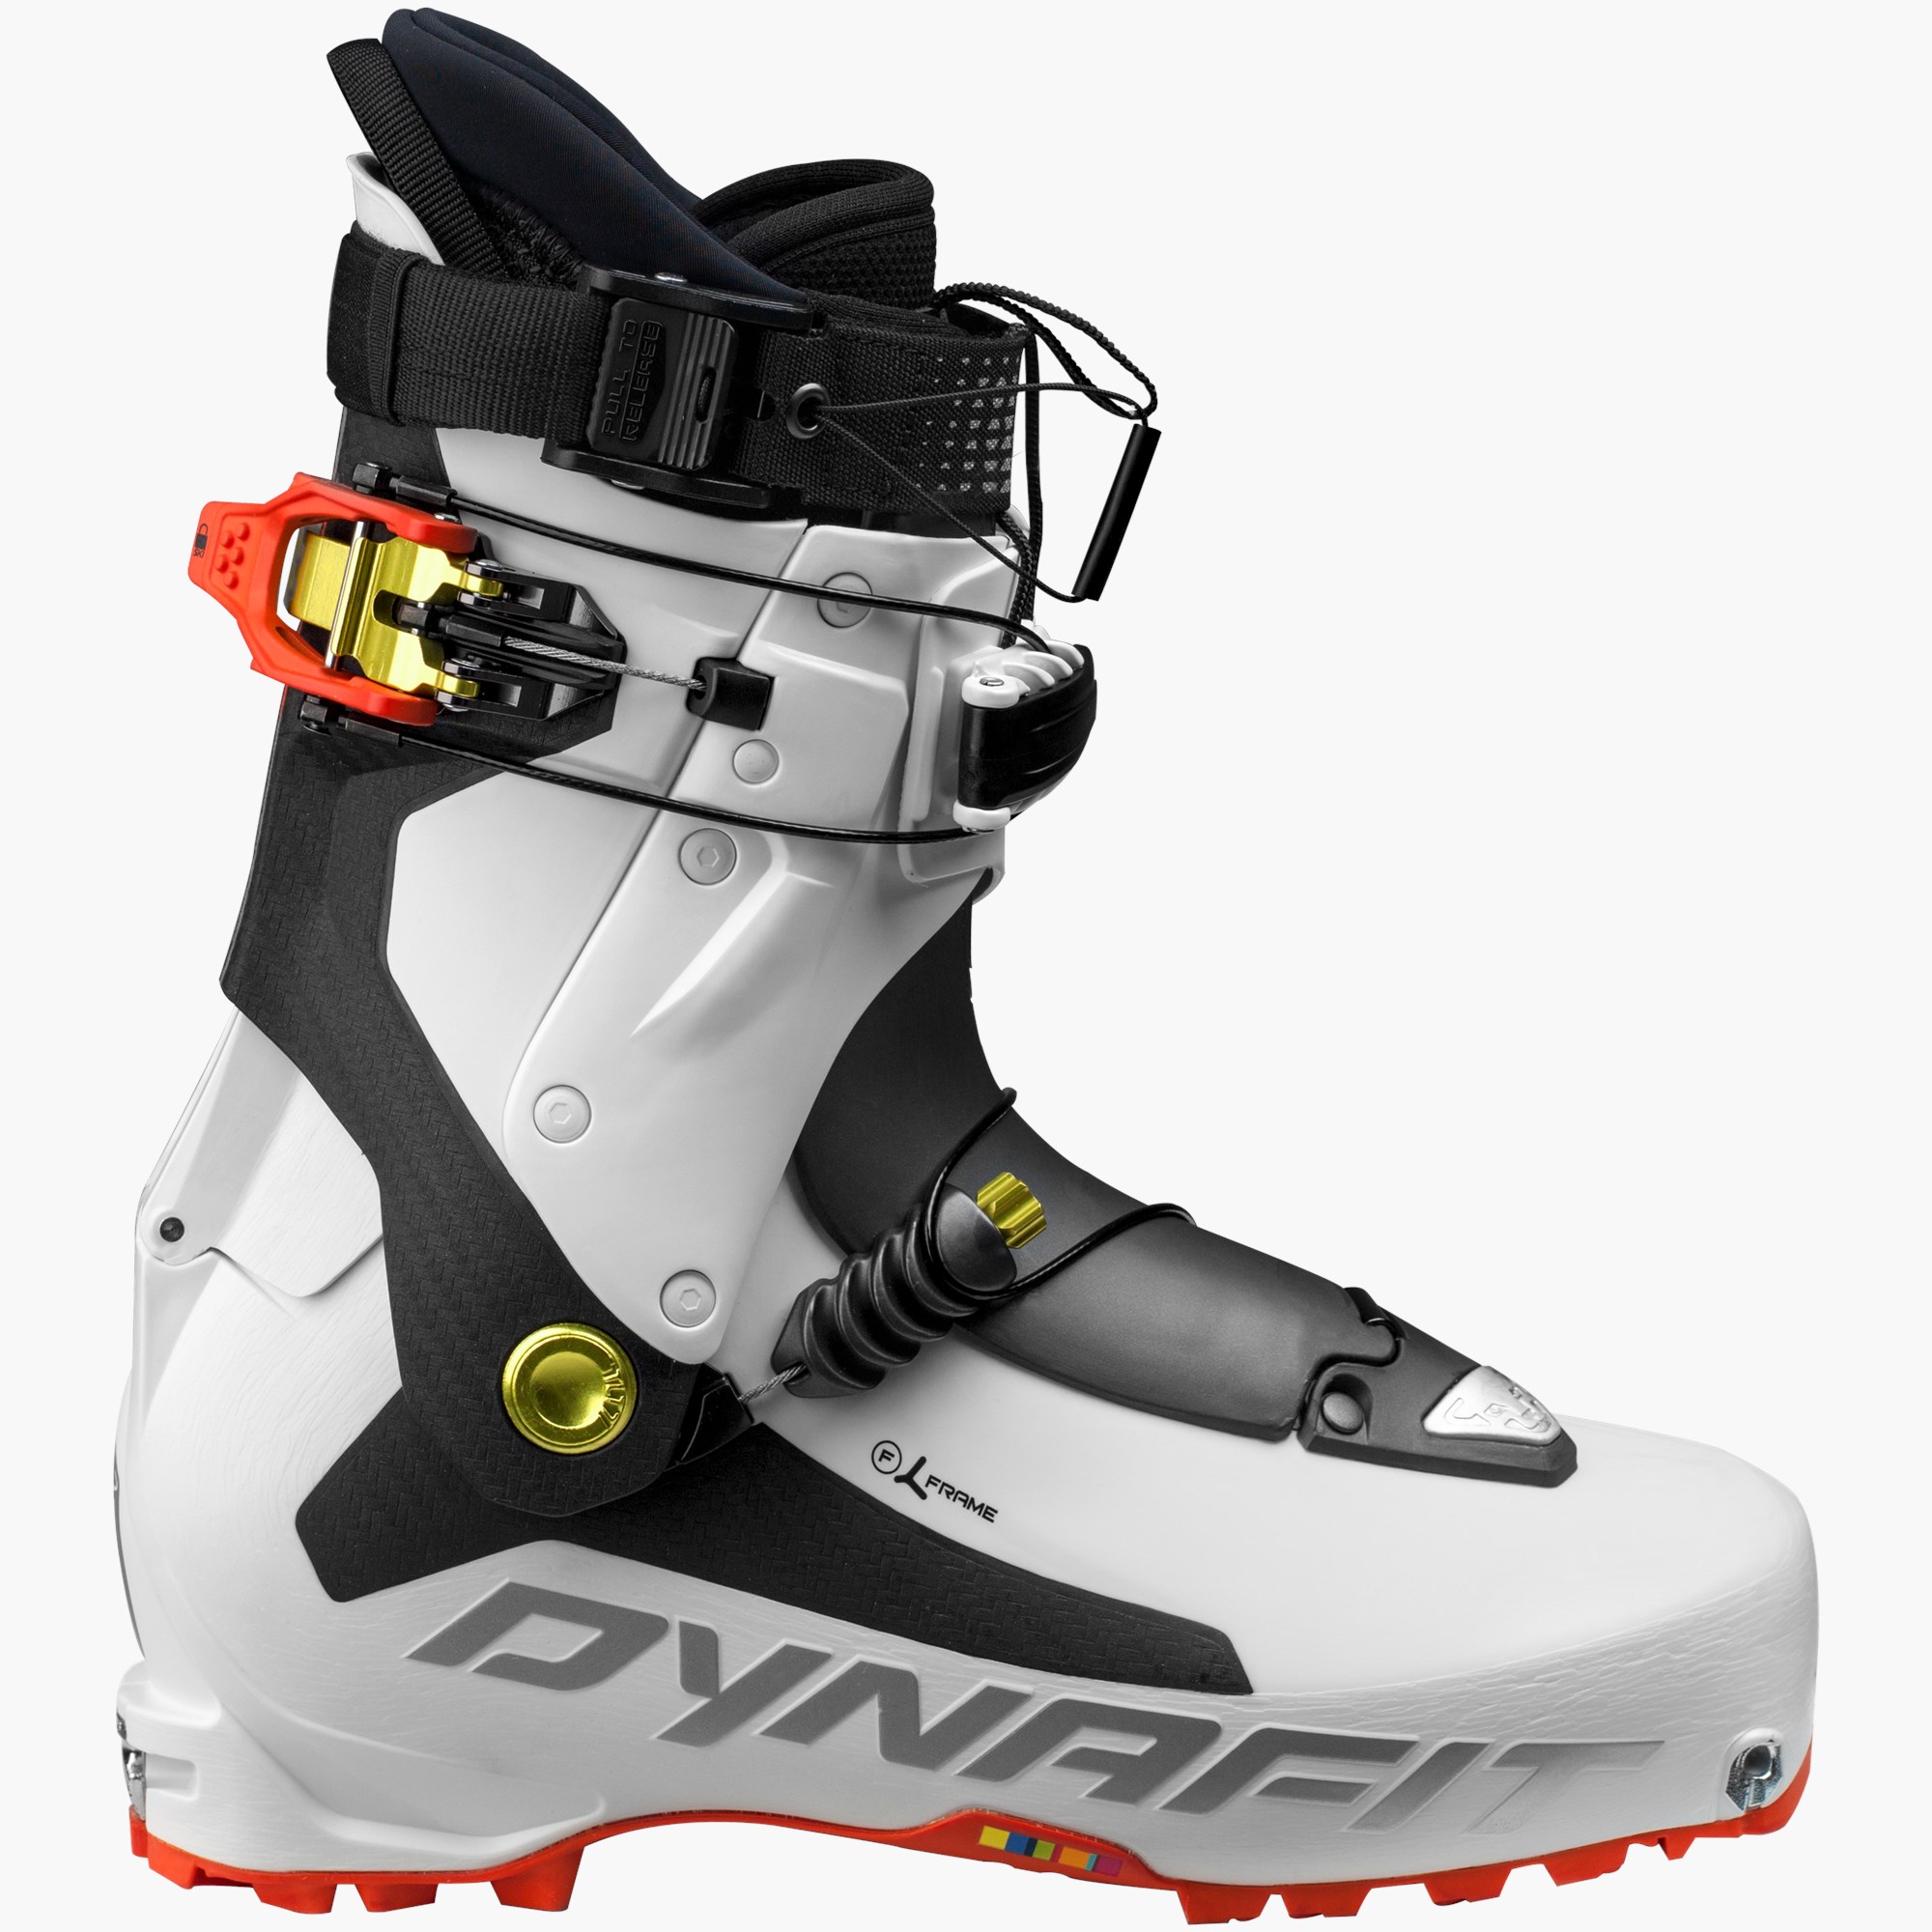 TLT 7 Expedition CL ski touring boot men